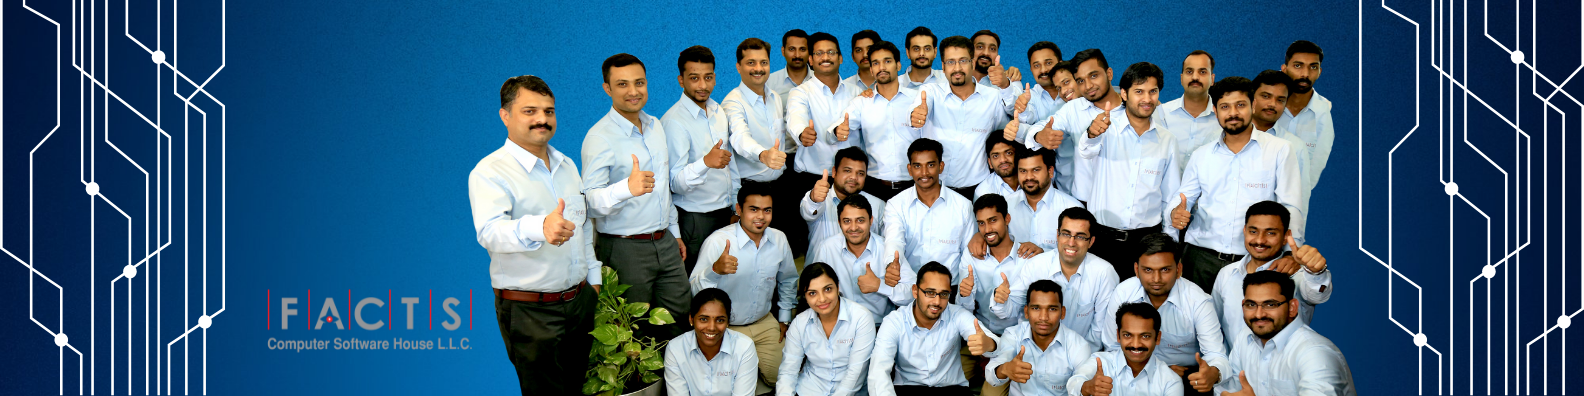 Facts Employees Group Photo